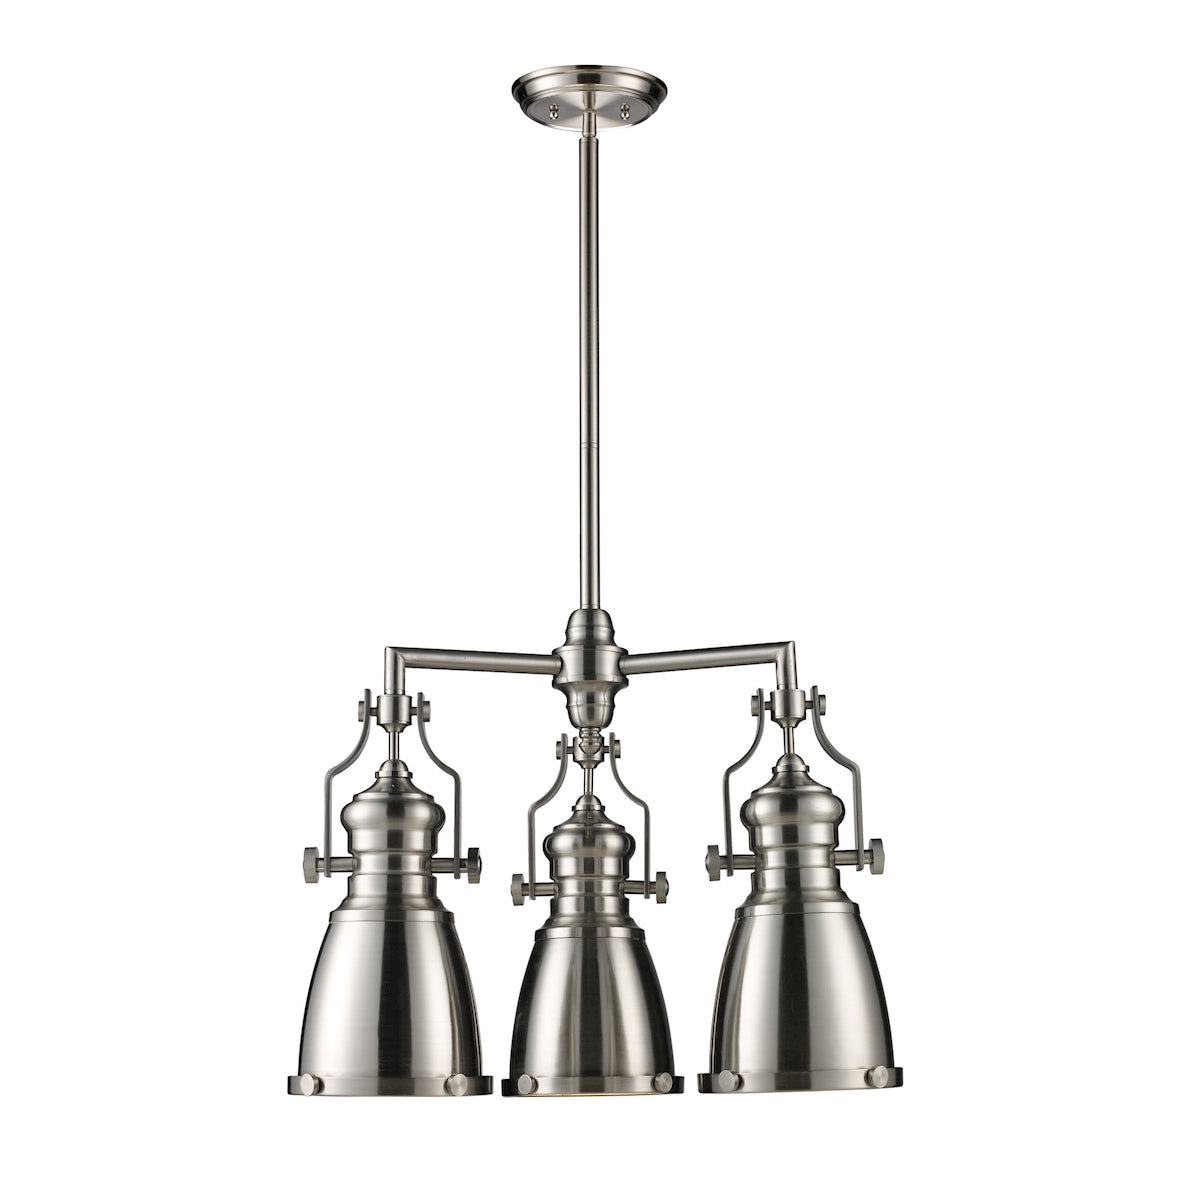 ELK Lighting 66120-3 - Chadwick 22" Wide 3-Light Chandelier in Satin Nickel with Matching Shades